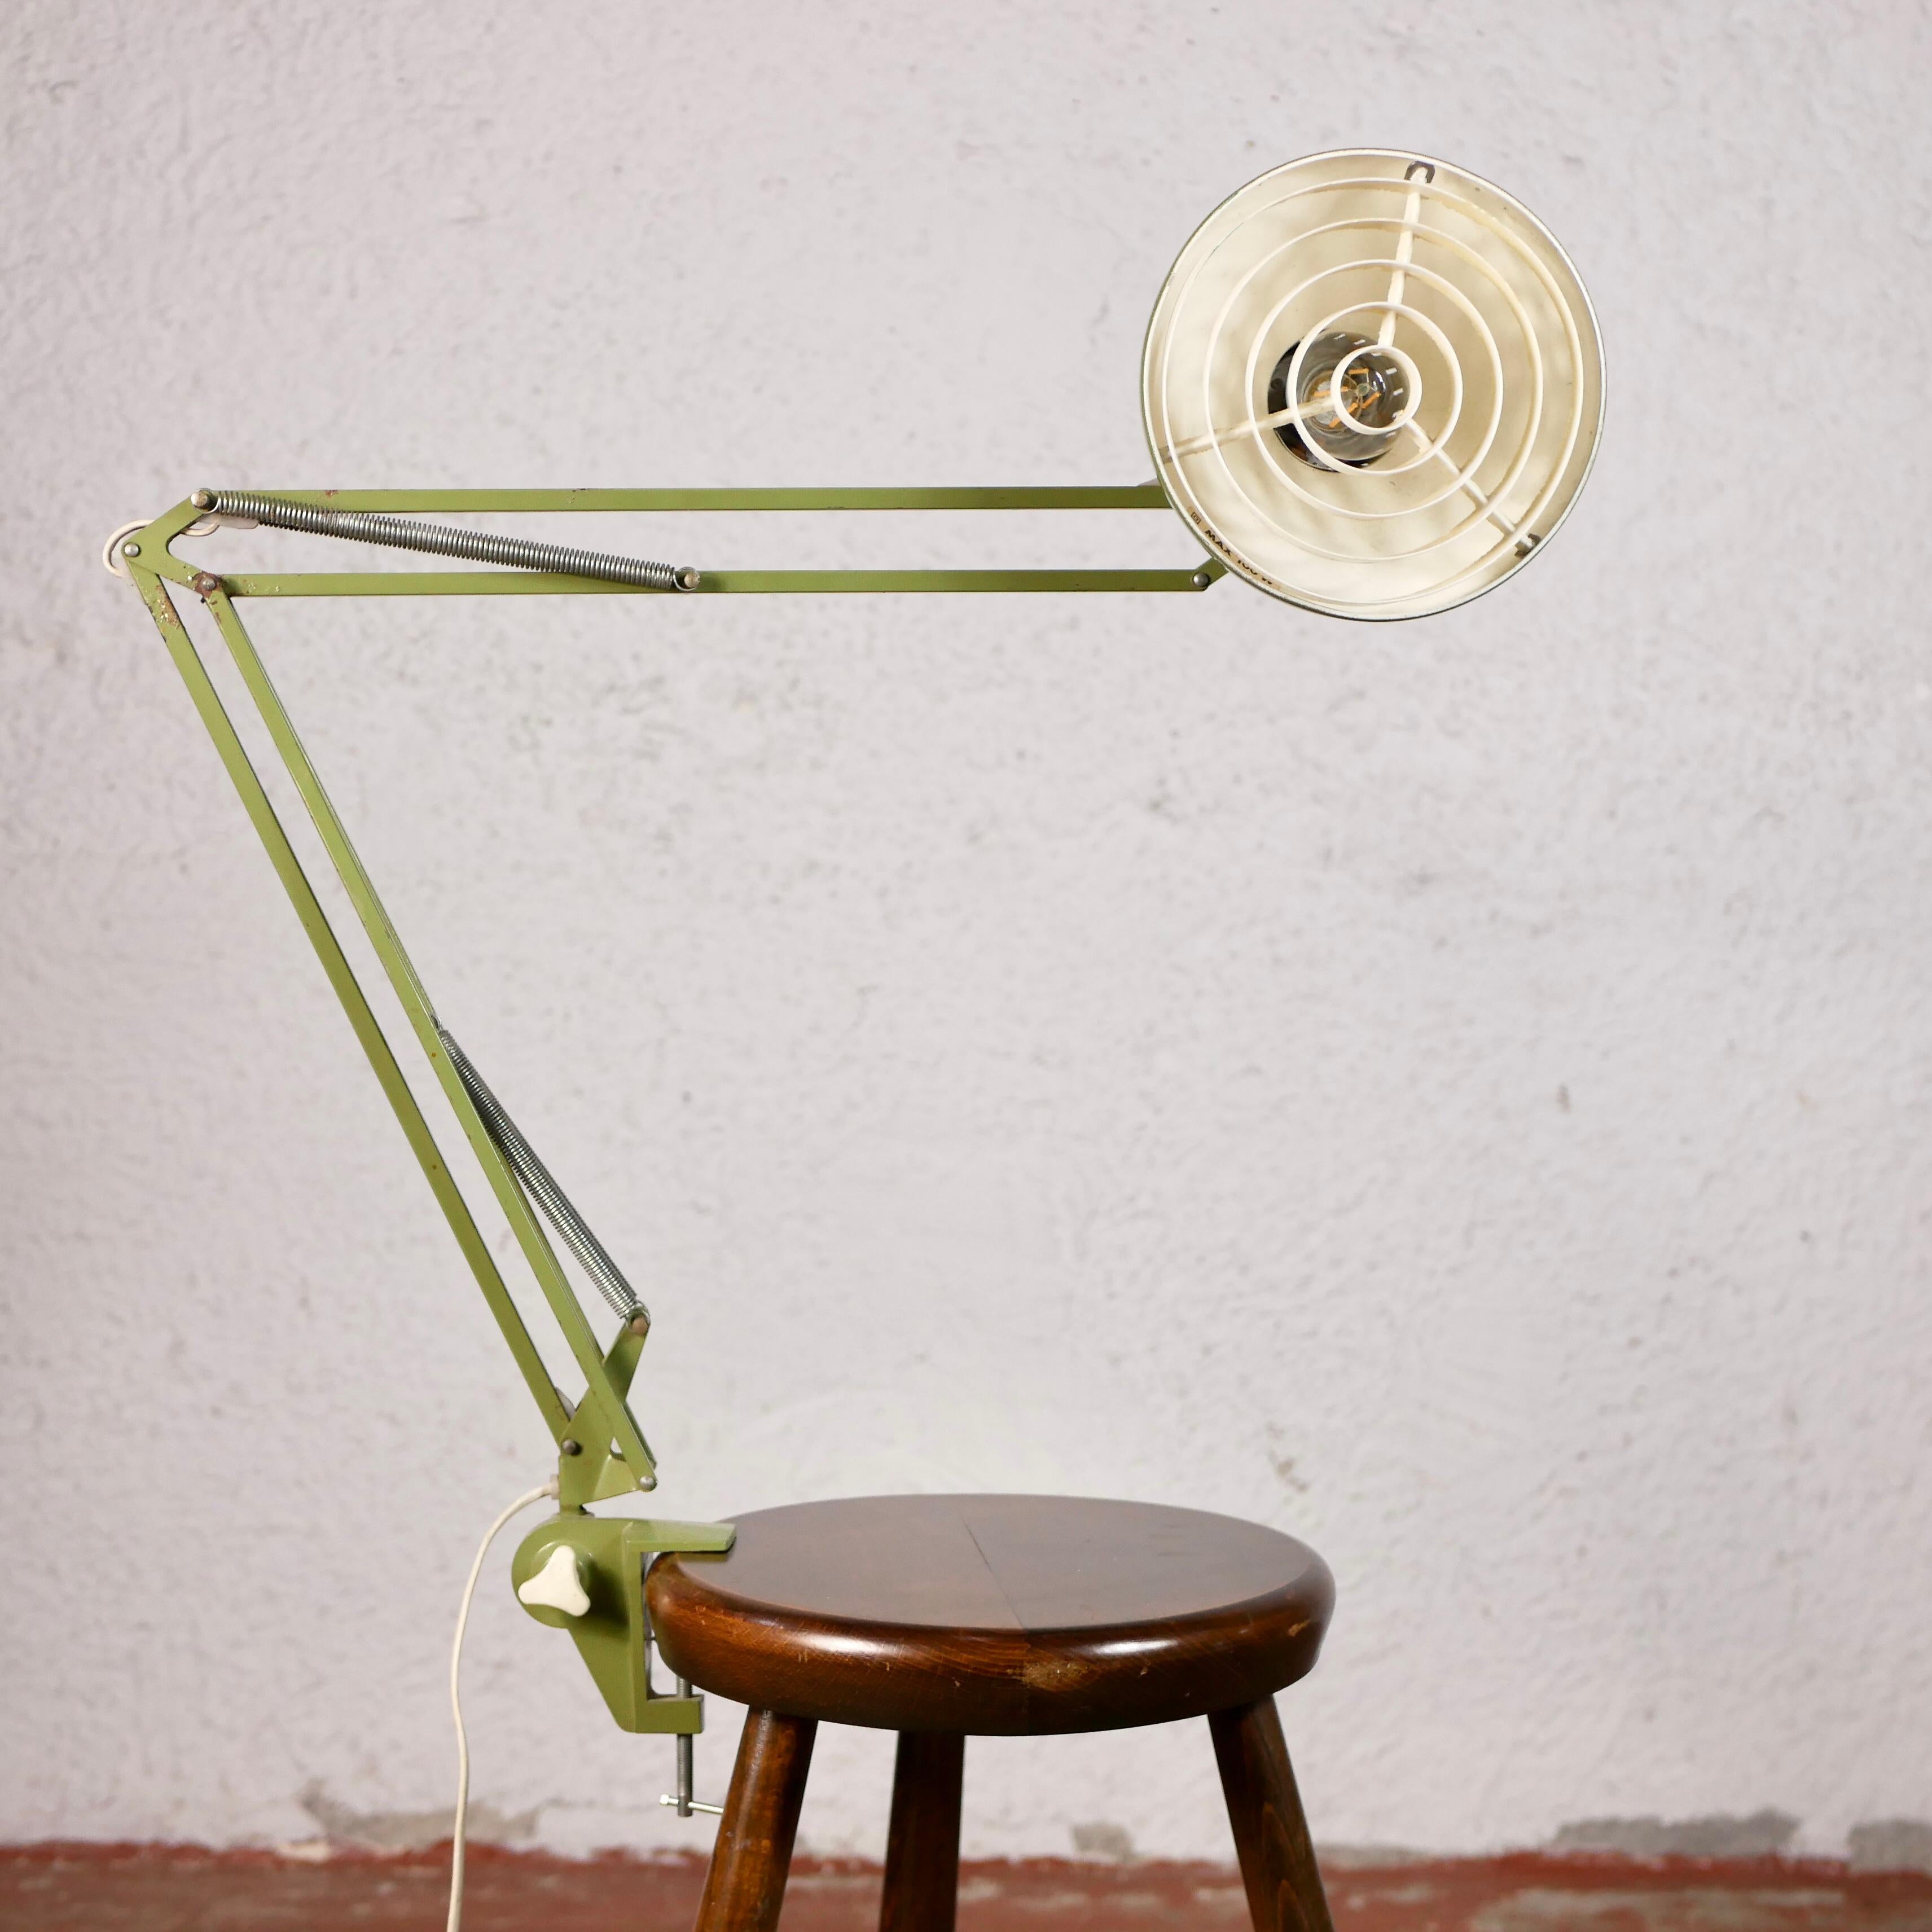 Late 20th Century Industrial Office Desk Lamp by Ledu, 1970s, Made in Sweden